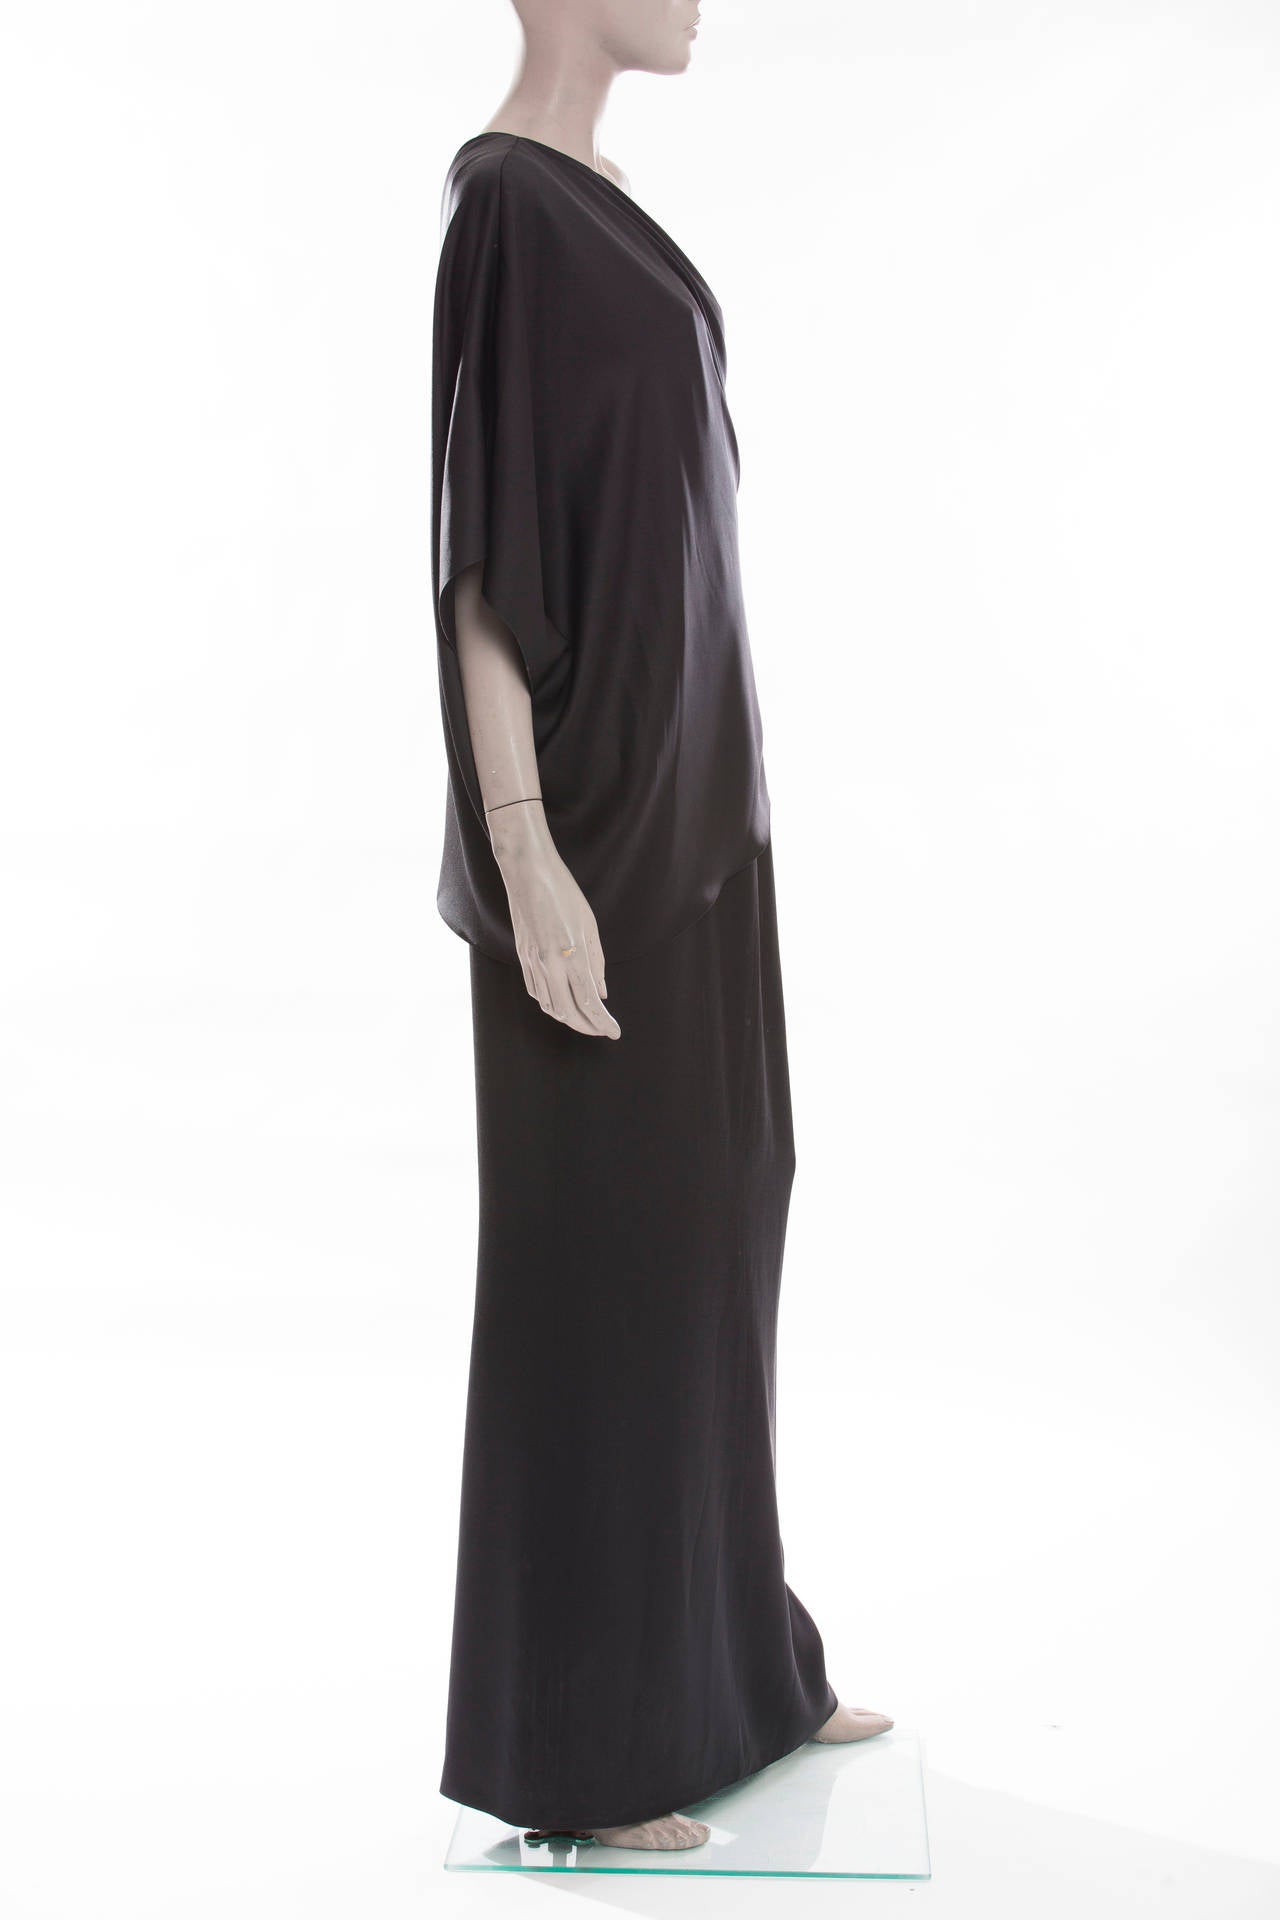 Chanel, Cruise 2009 black one-shoulder silk evening dress with ruching at side, slit at back, and concealed side zip closure.
Bust 38”, Waist 30”, Hip 40”, Length 59.5”
EU.42, US 10